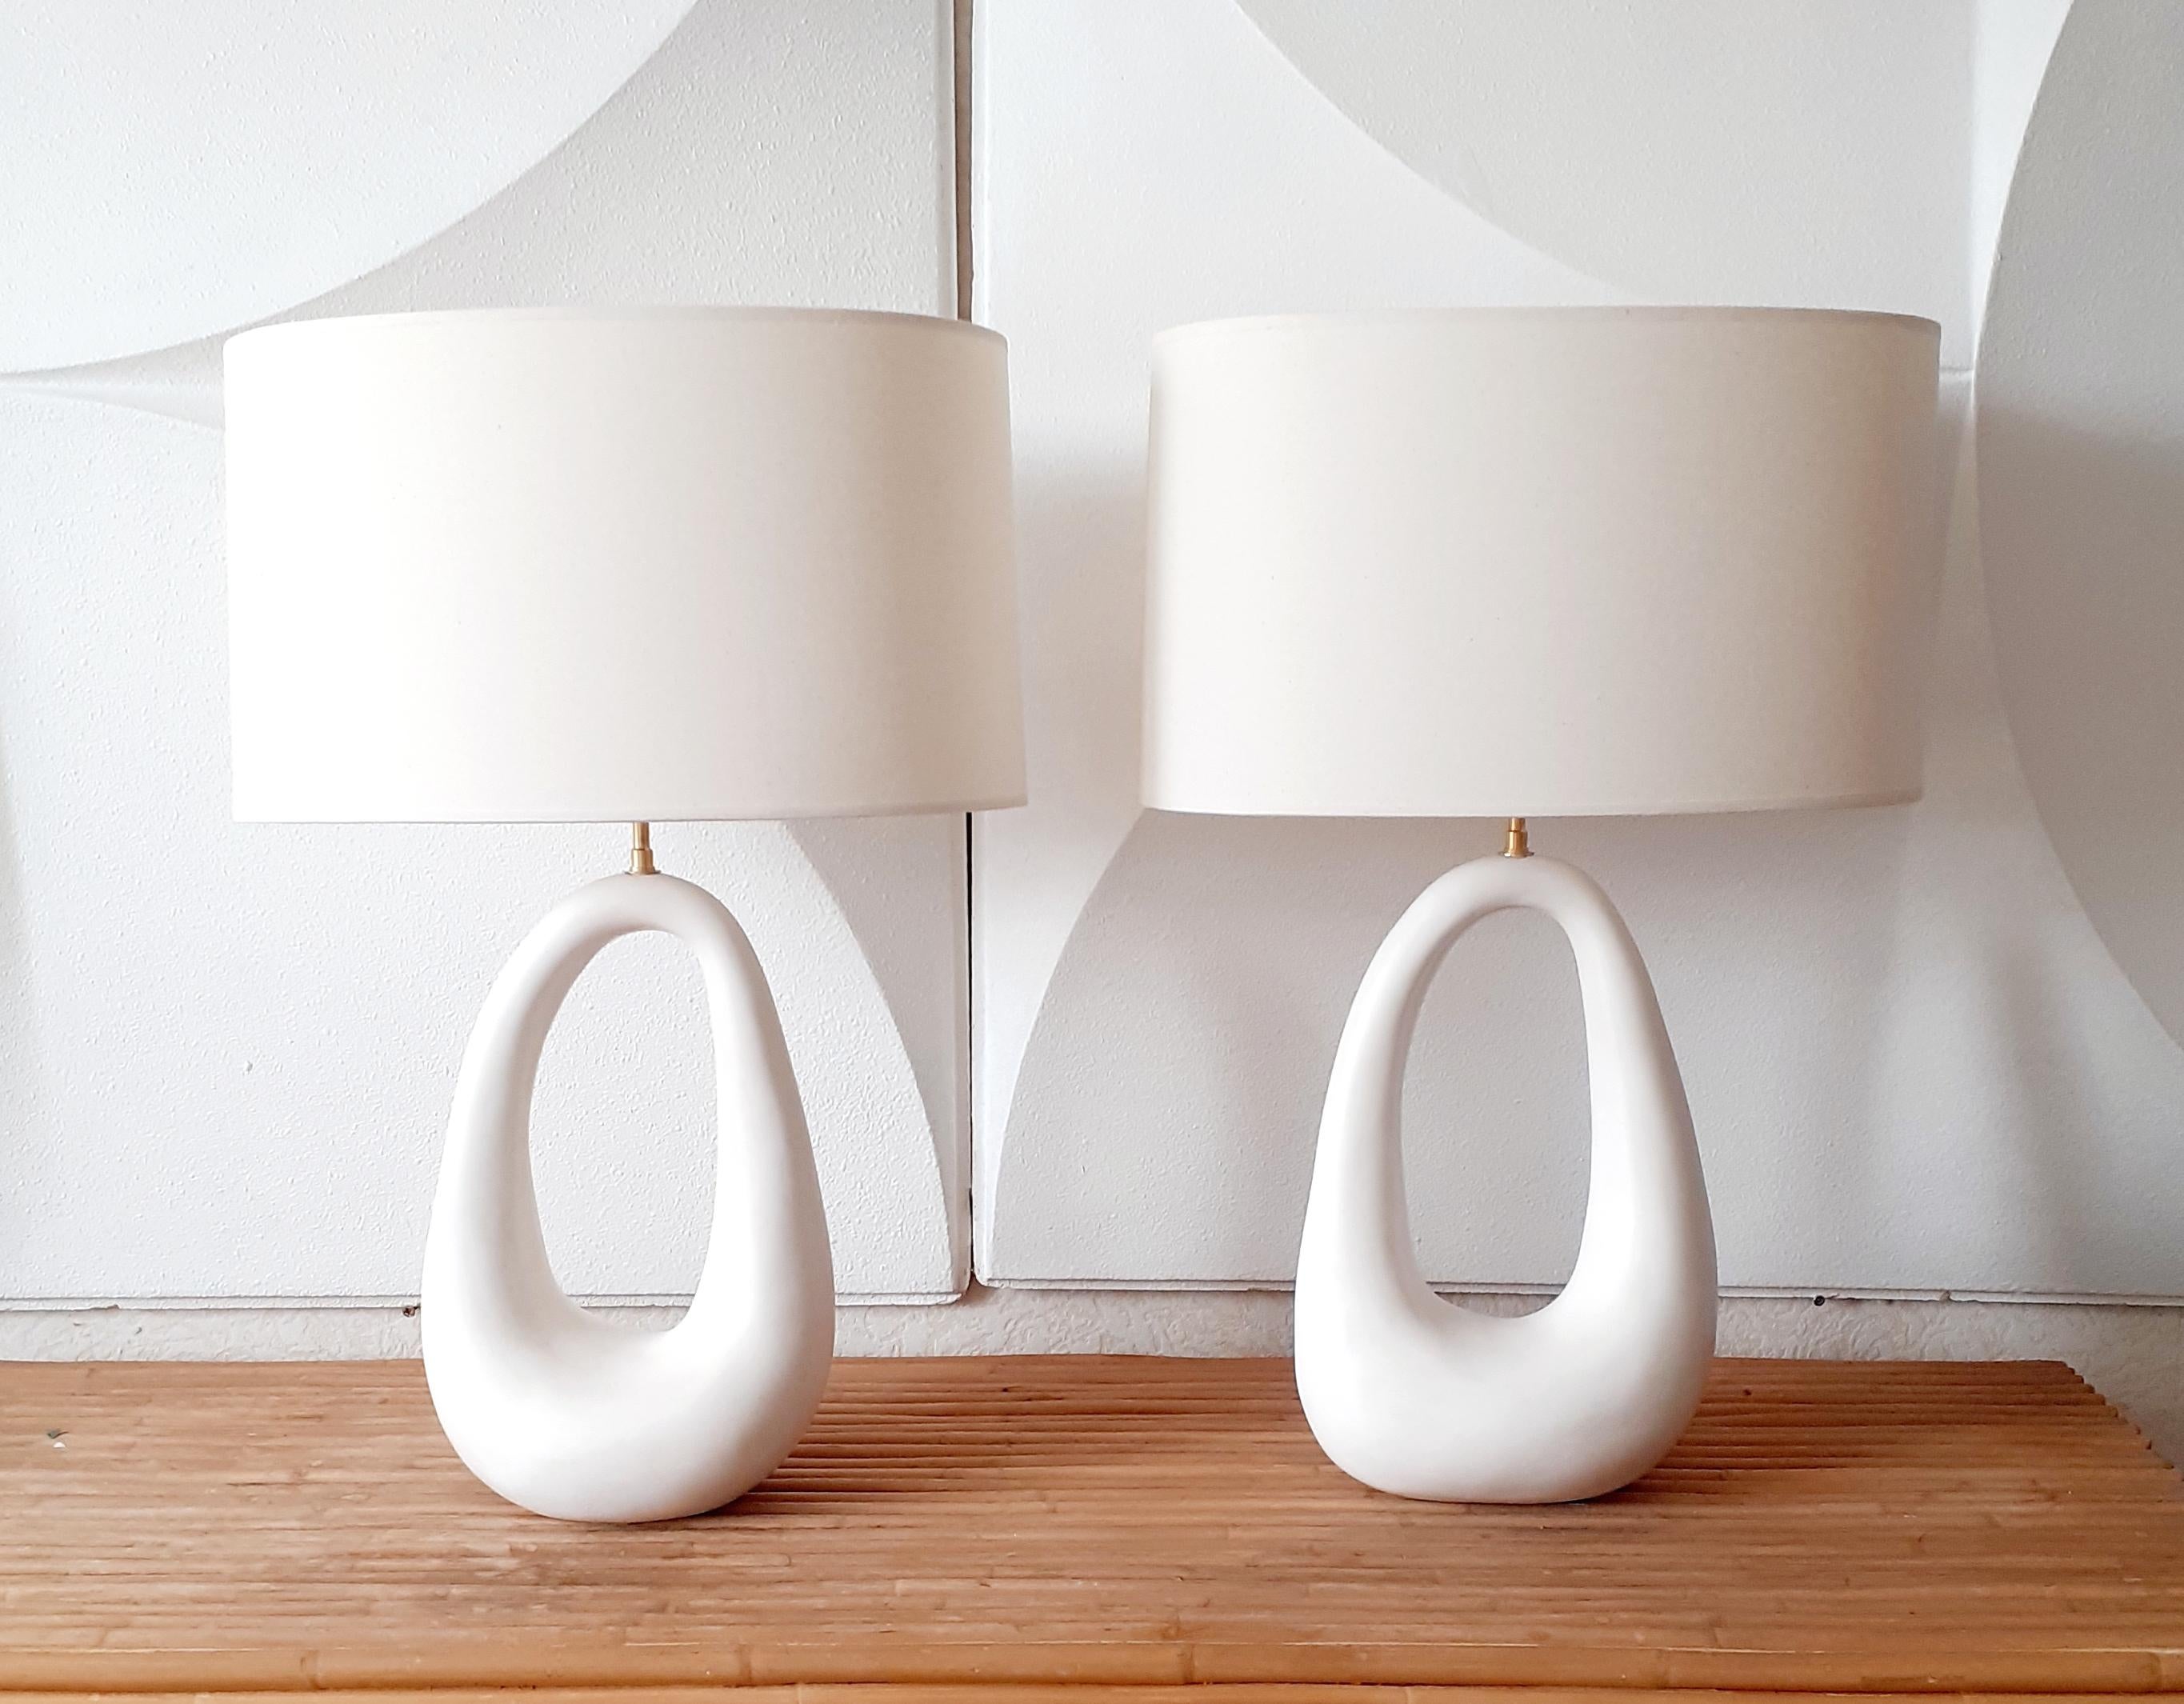 French white enameled ceramic lamps with linen shape, handmade by EF STUDIO, Paris.
Brass structure. Very decorative freeform.
Dimensions with shape 25.6 x 16.1 inch
Dimension of the ceramic 15.3 x 9.8 inch.